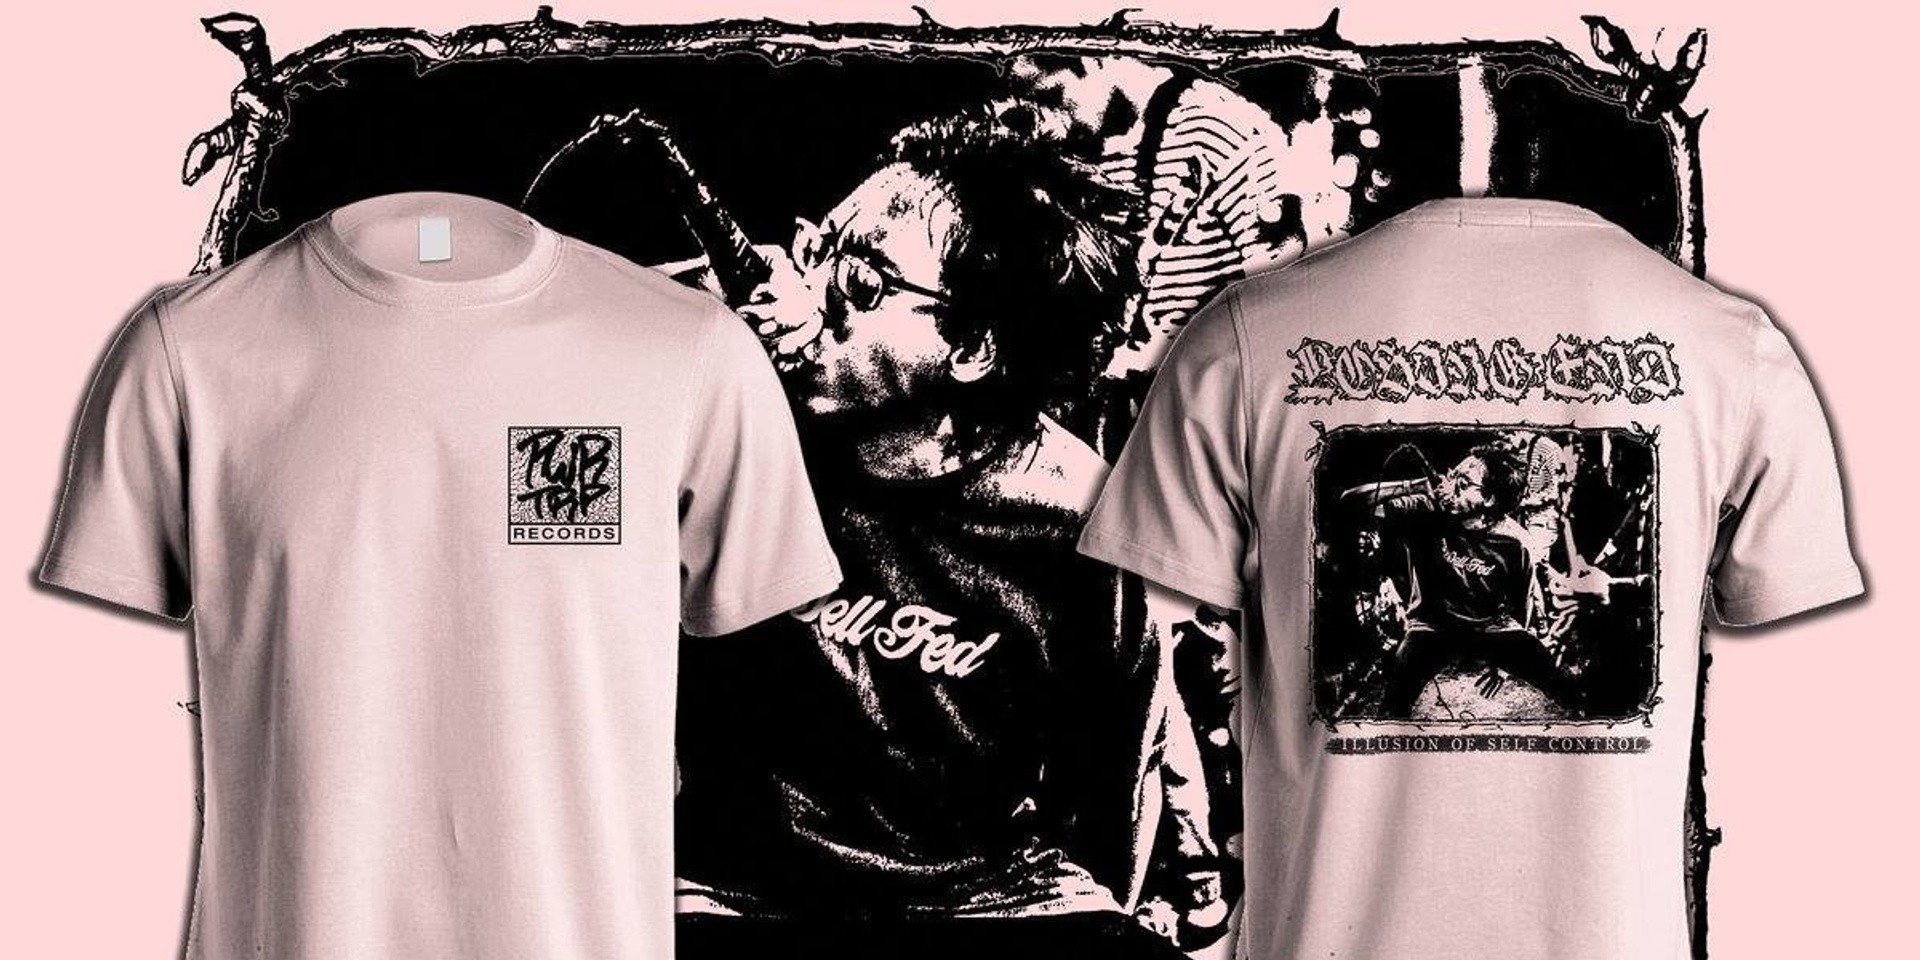 Losing End puts up benefit tees for sale, profits go to Breast Cancer Foundation 